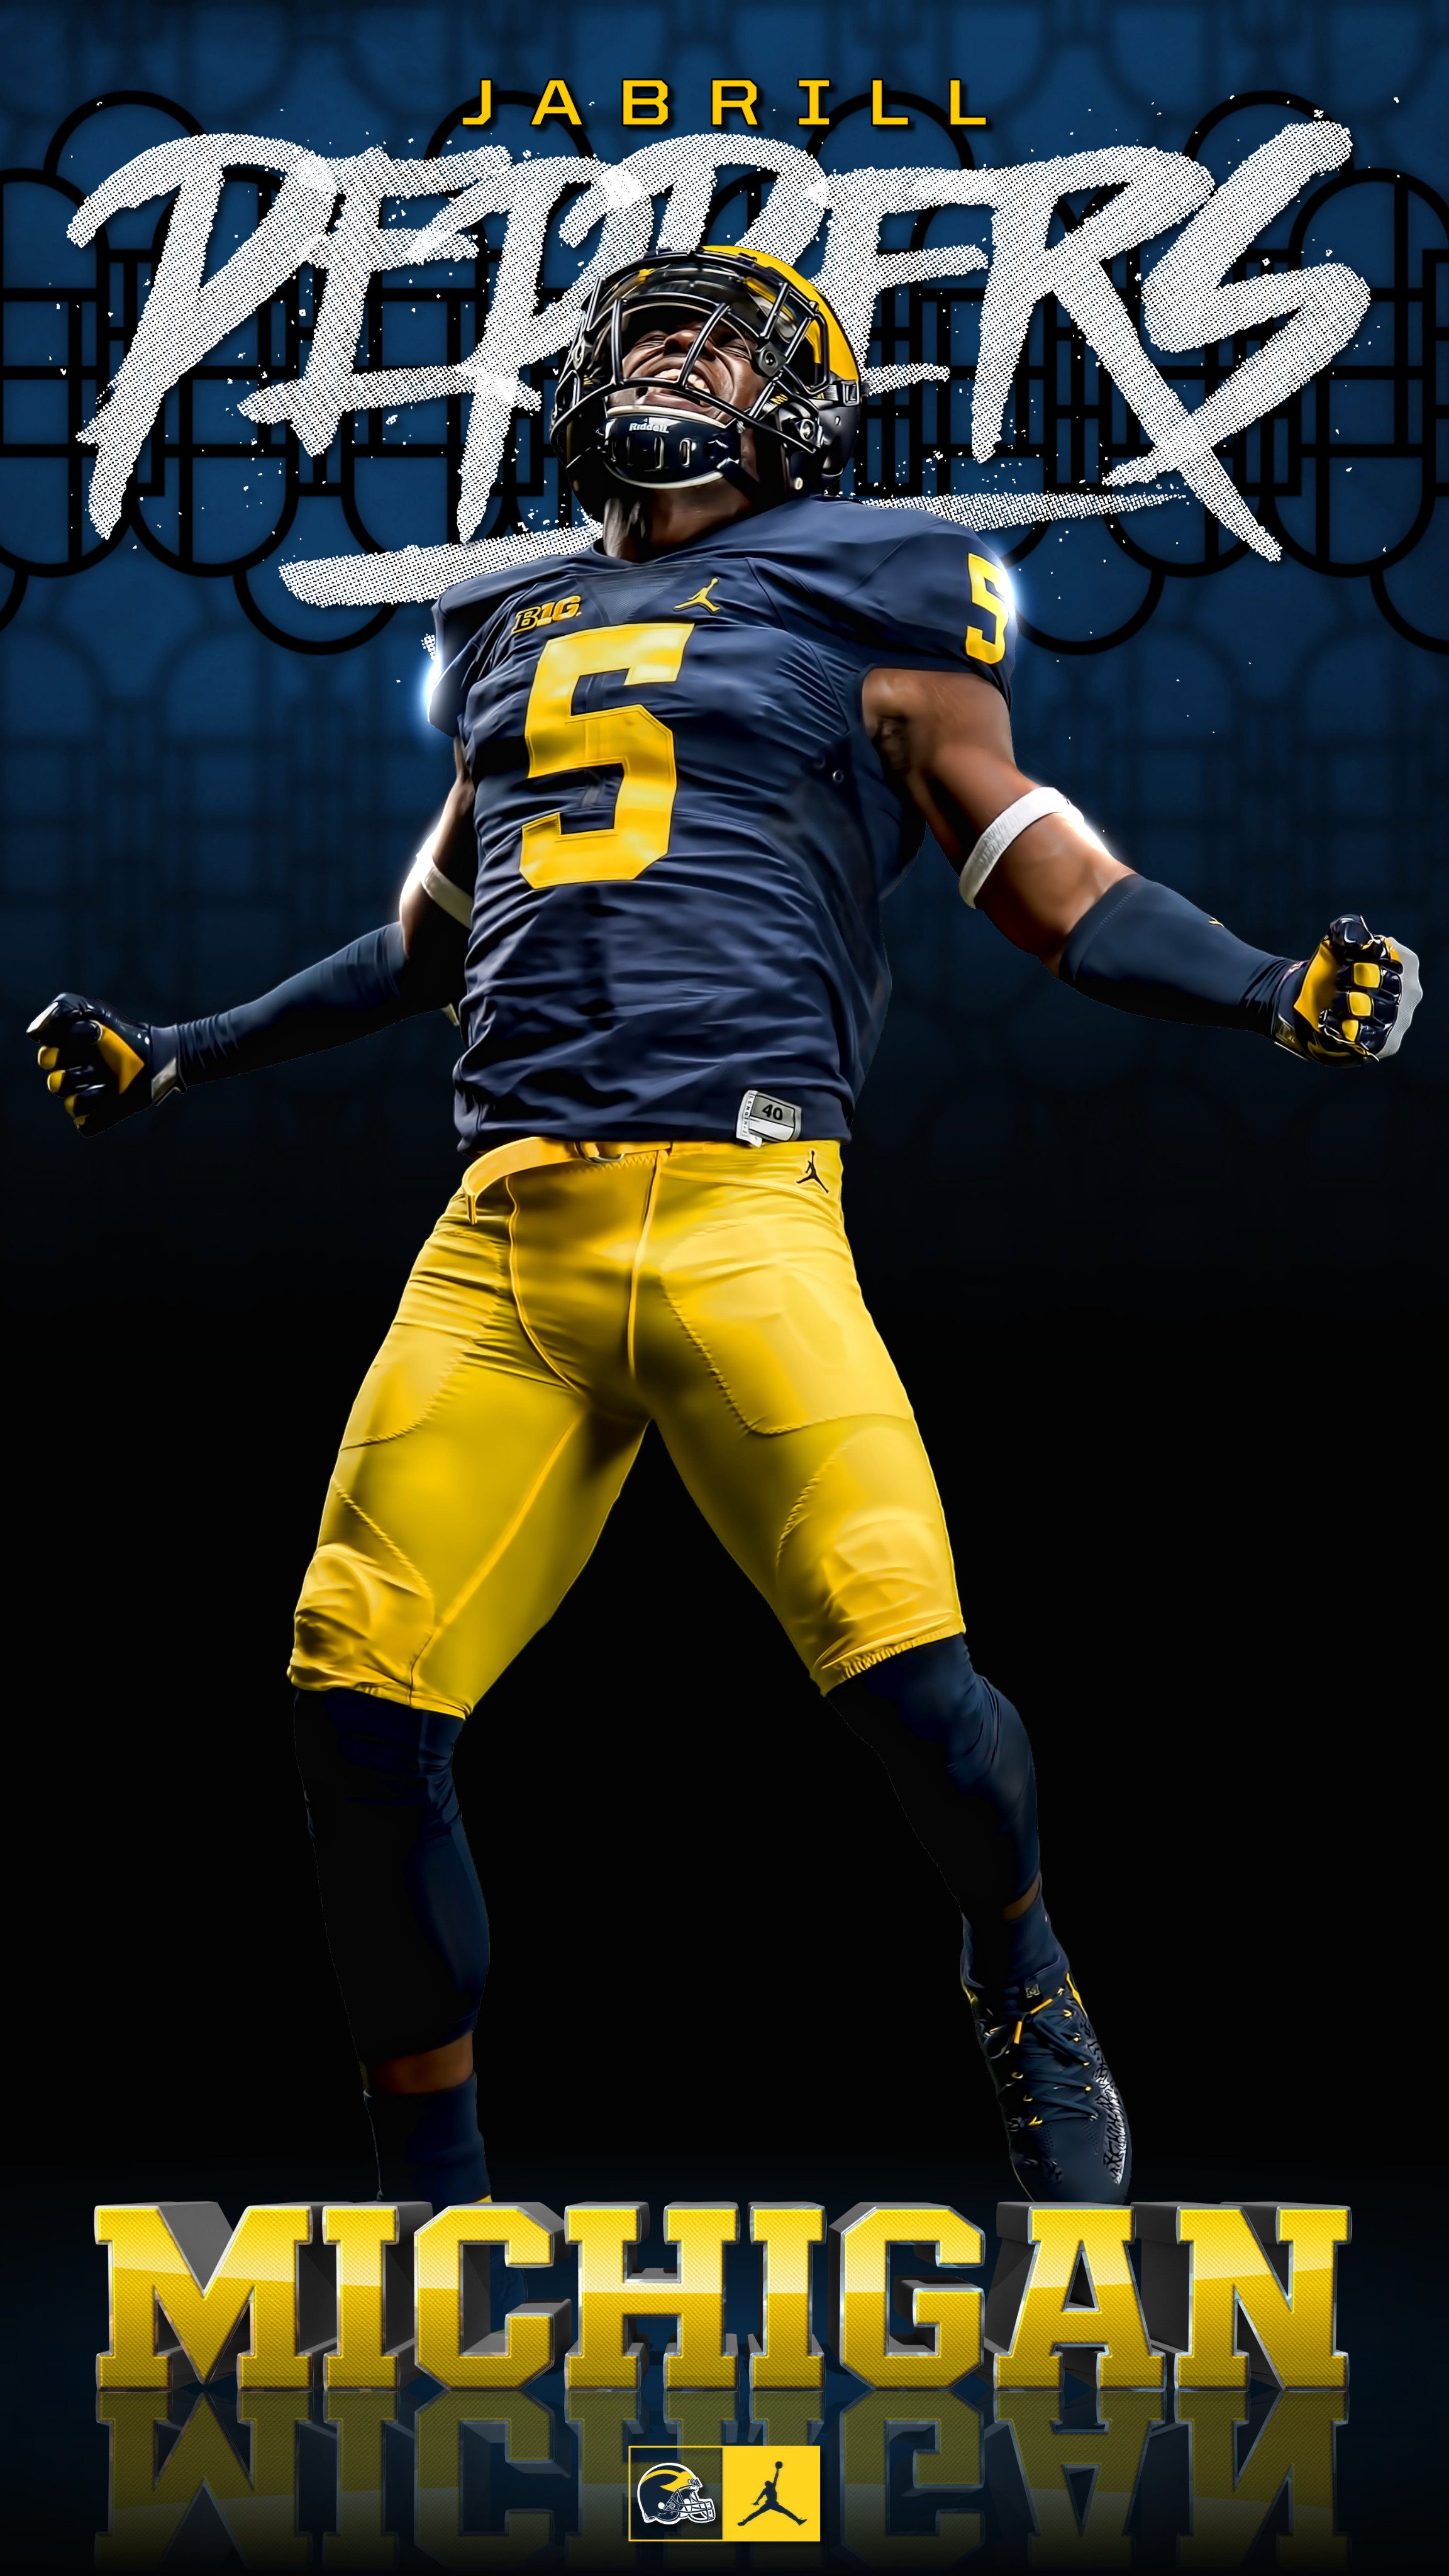 Michigan Football some sweet wallpaper for your phone? We got you